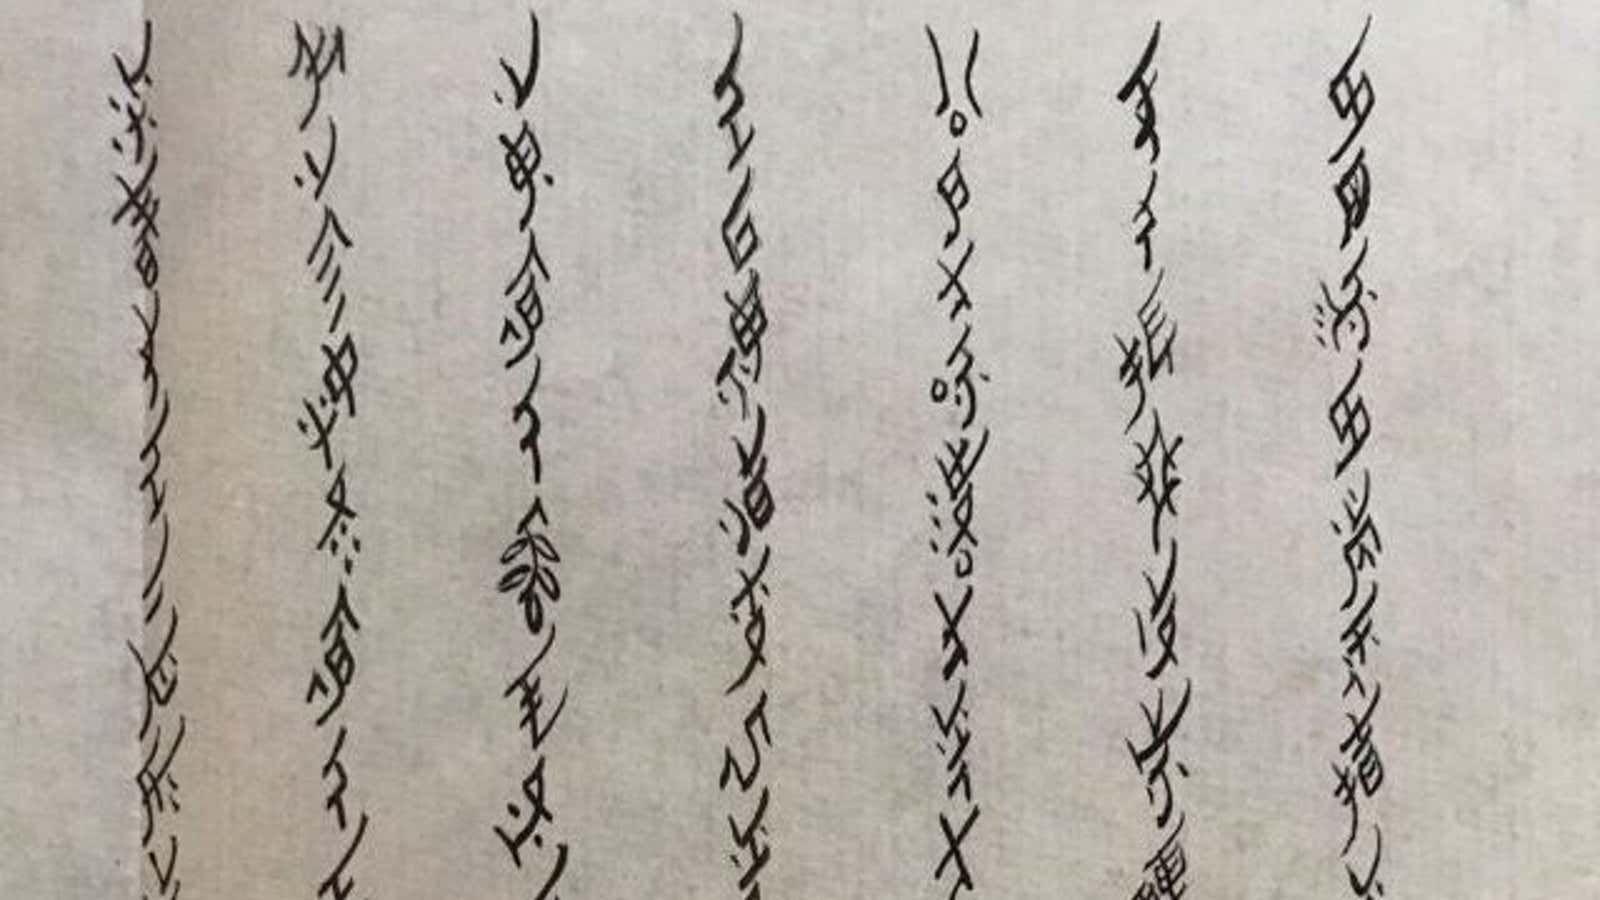 The female-only Nüshu script from China’s Hunan province.